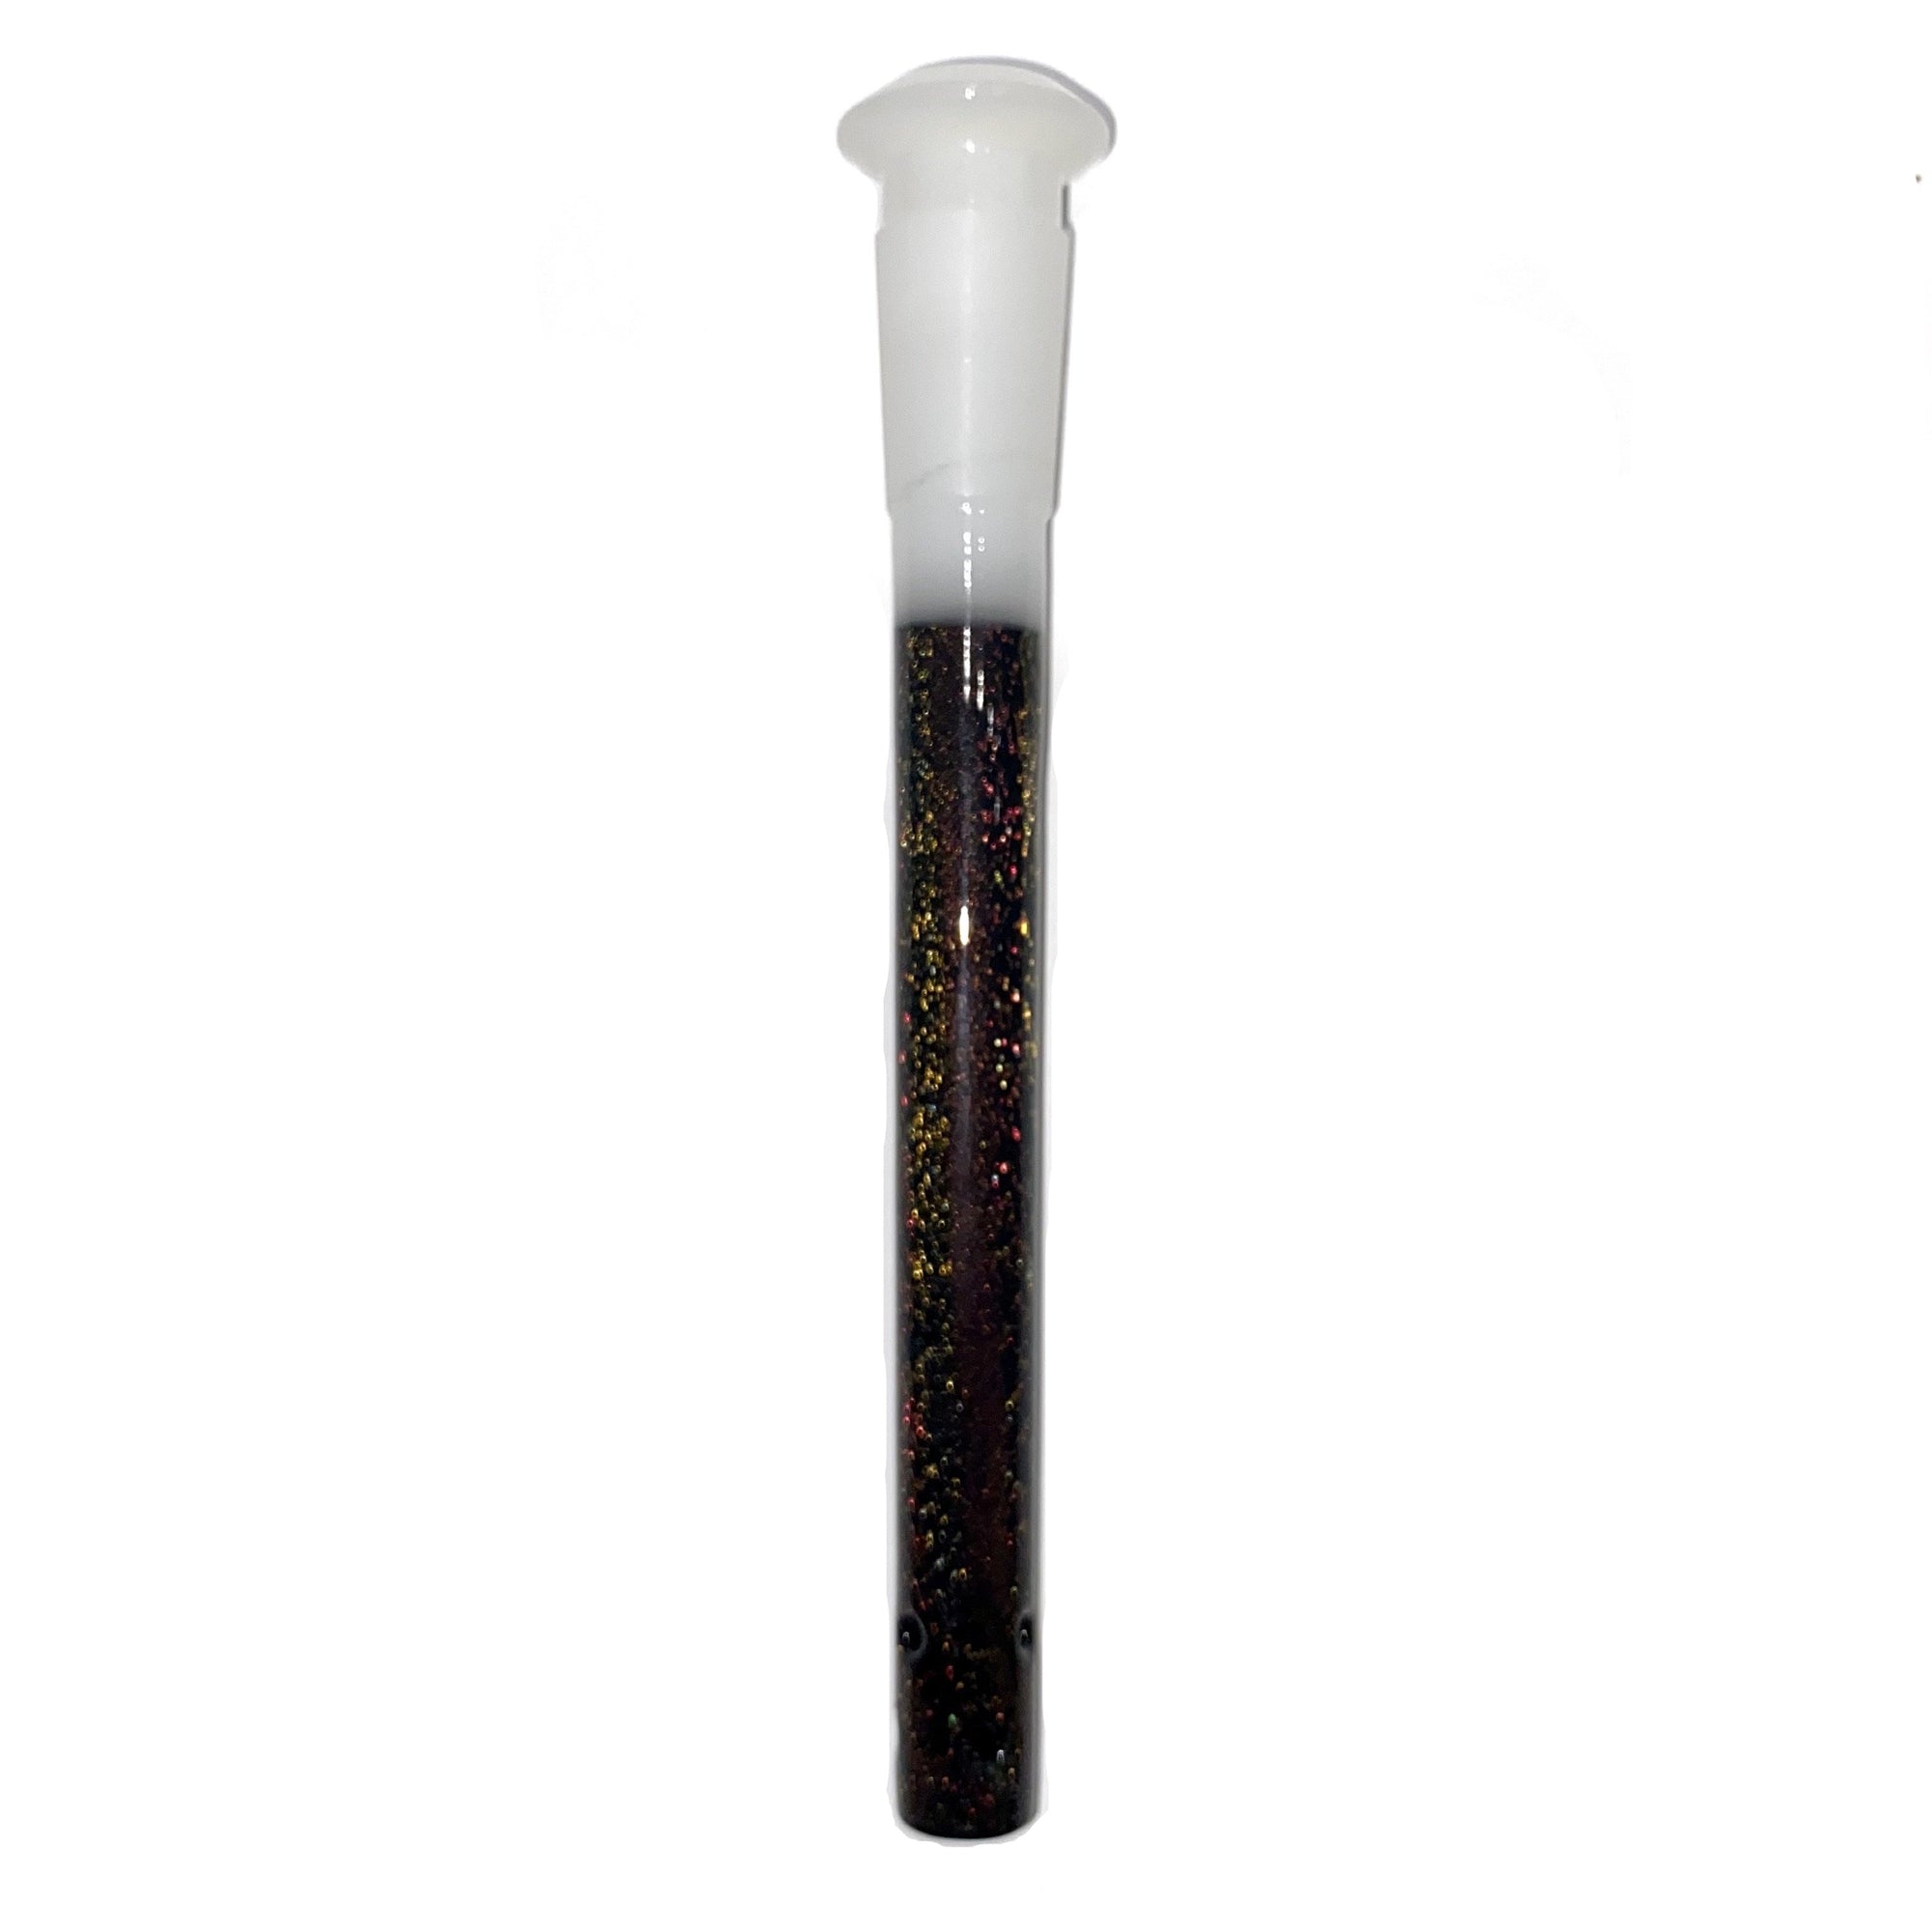 Dustorm Glass 18/14 Dichro Downstem (Red/Gold) 6 Inch with White Joint show variants